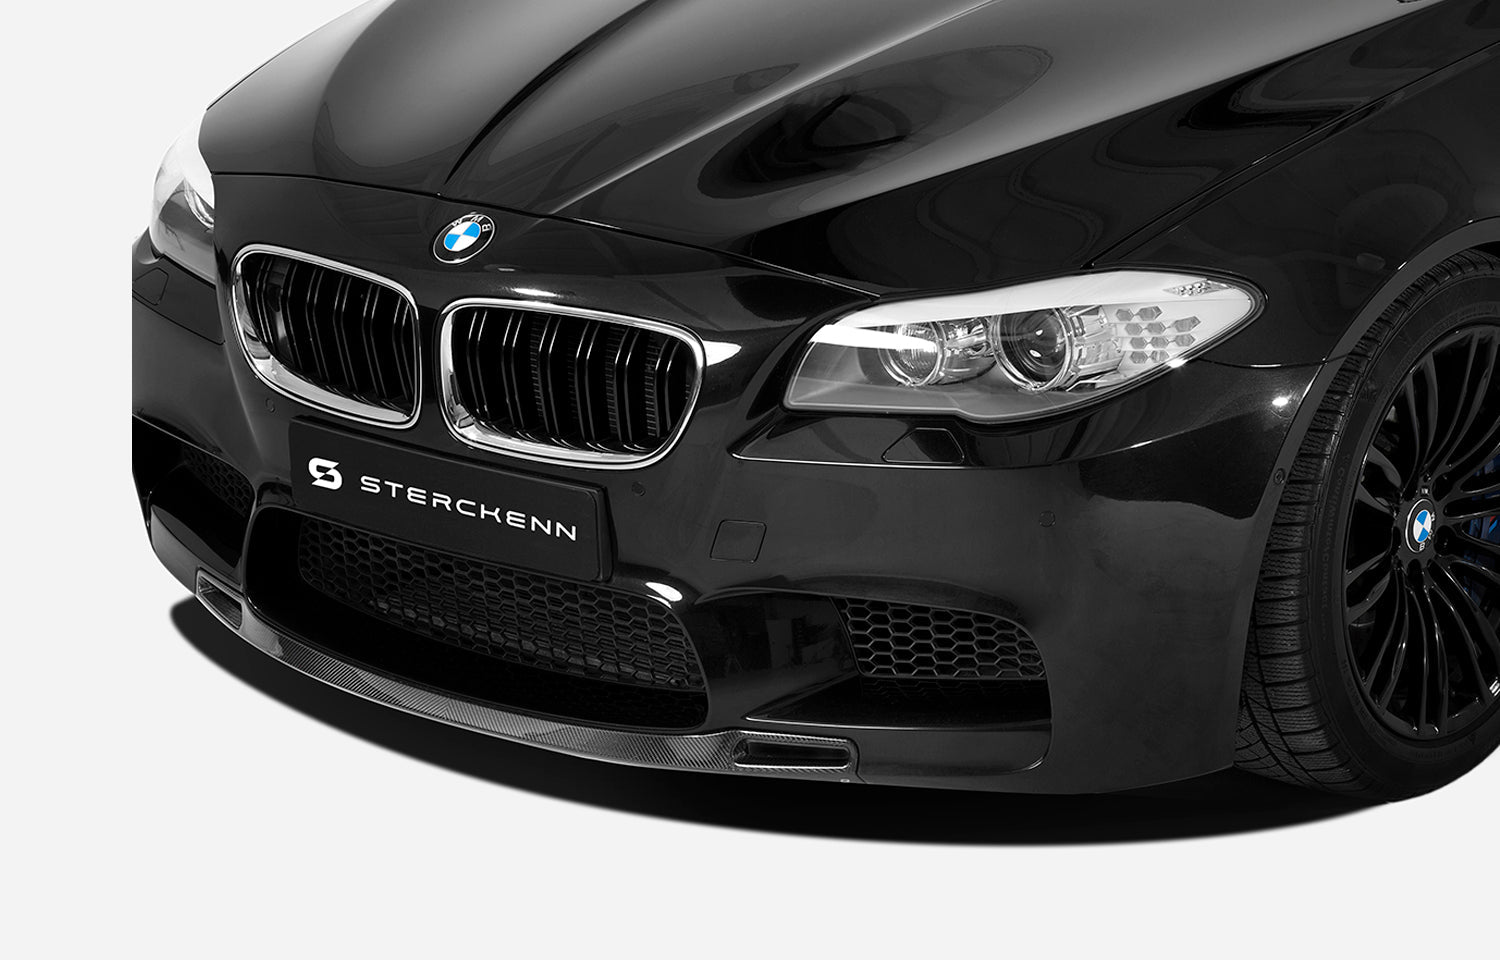 Front bumper with splitter of black BMW M5 (F10) on a white background